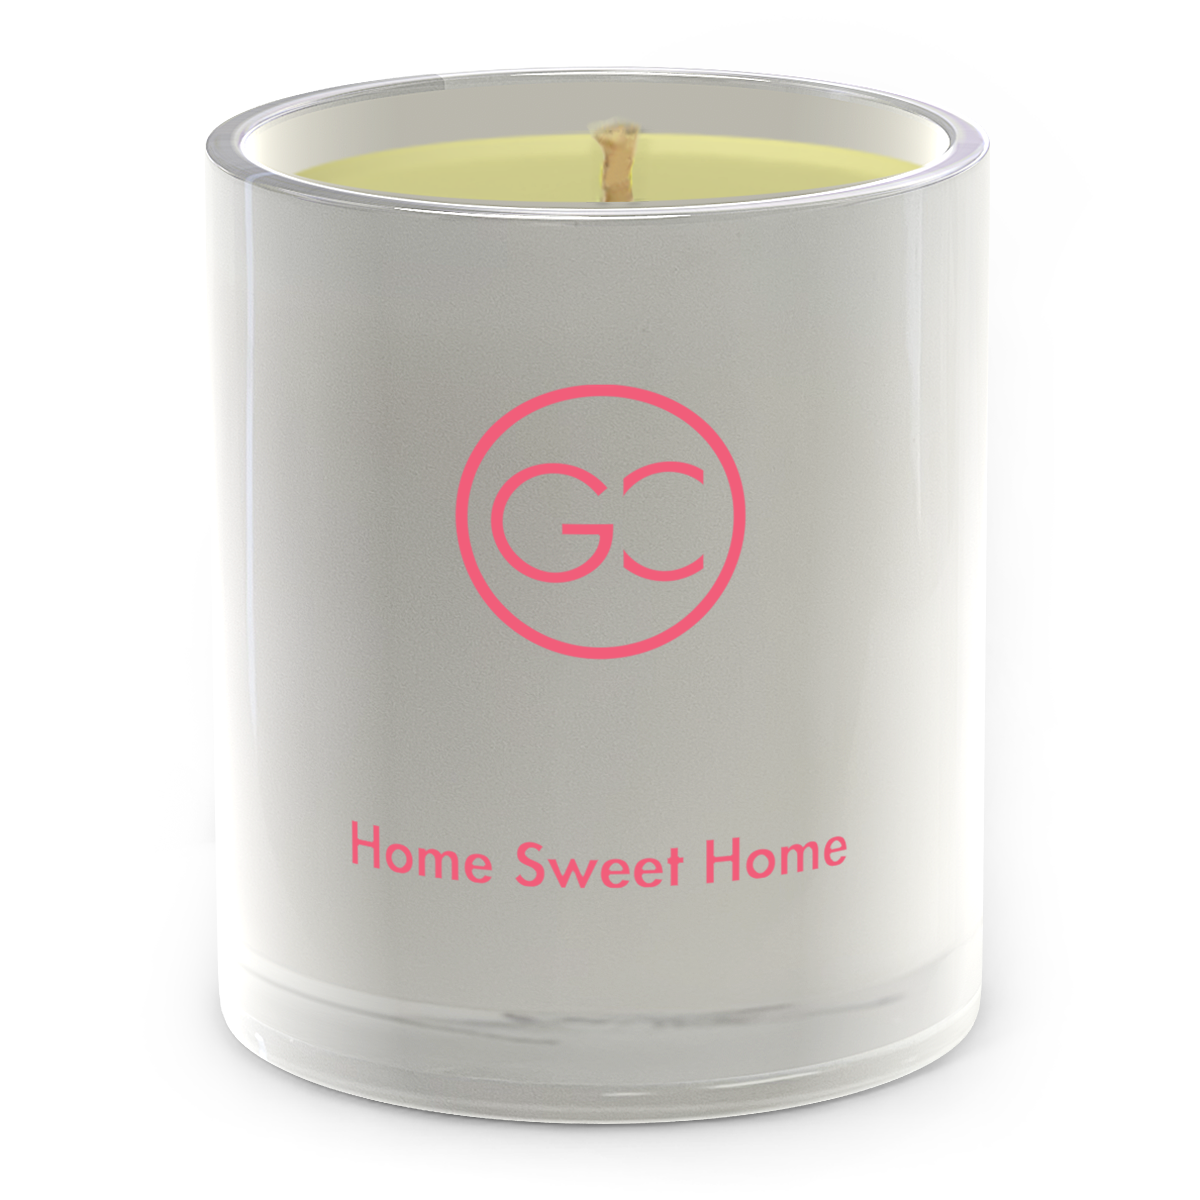 Home Sweet Home - Gardenia Scented Soy Candle 55hr Burn